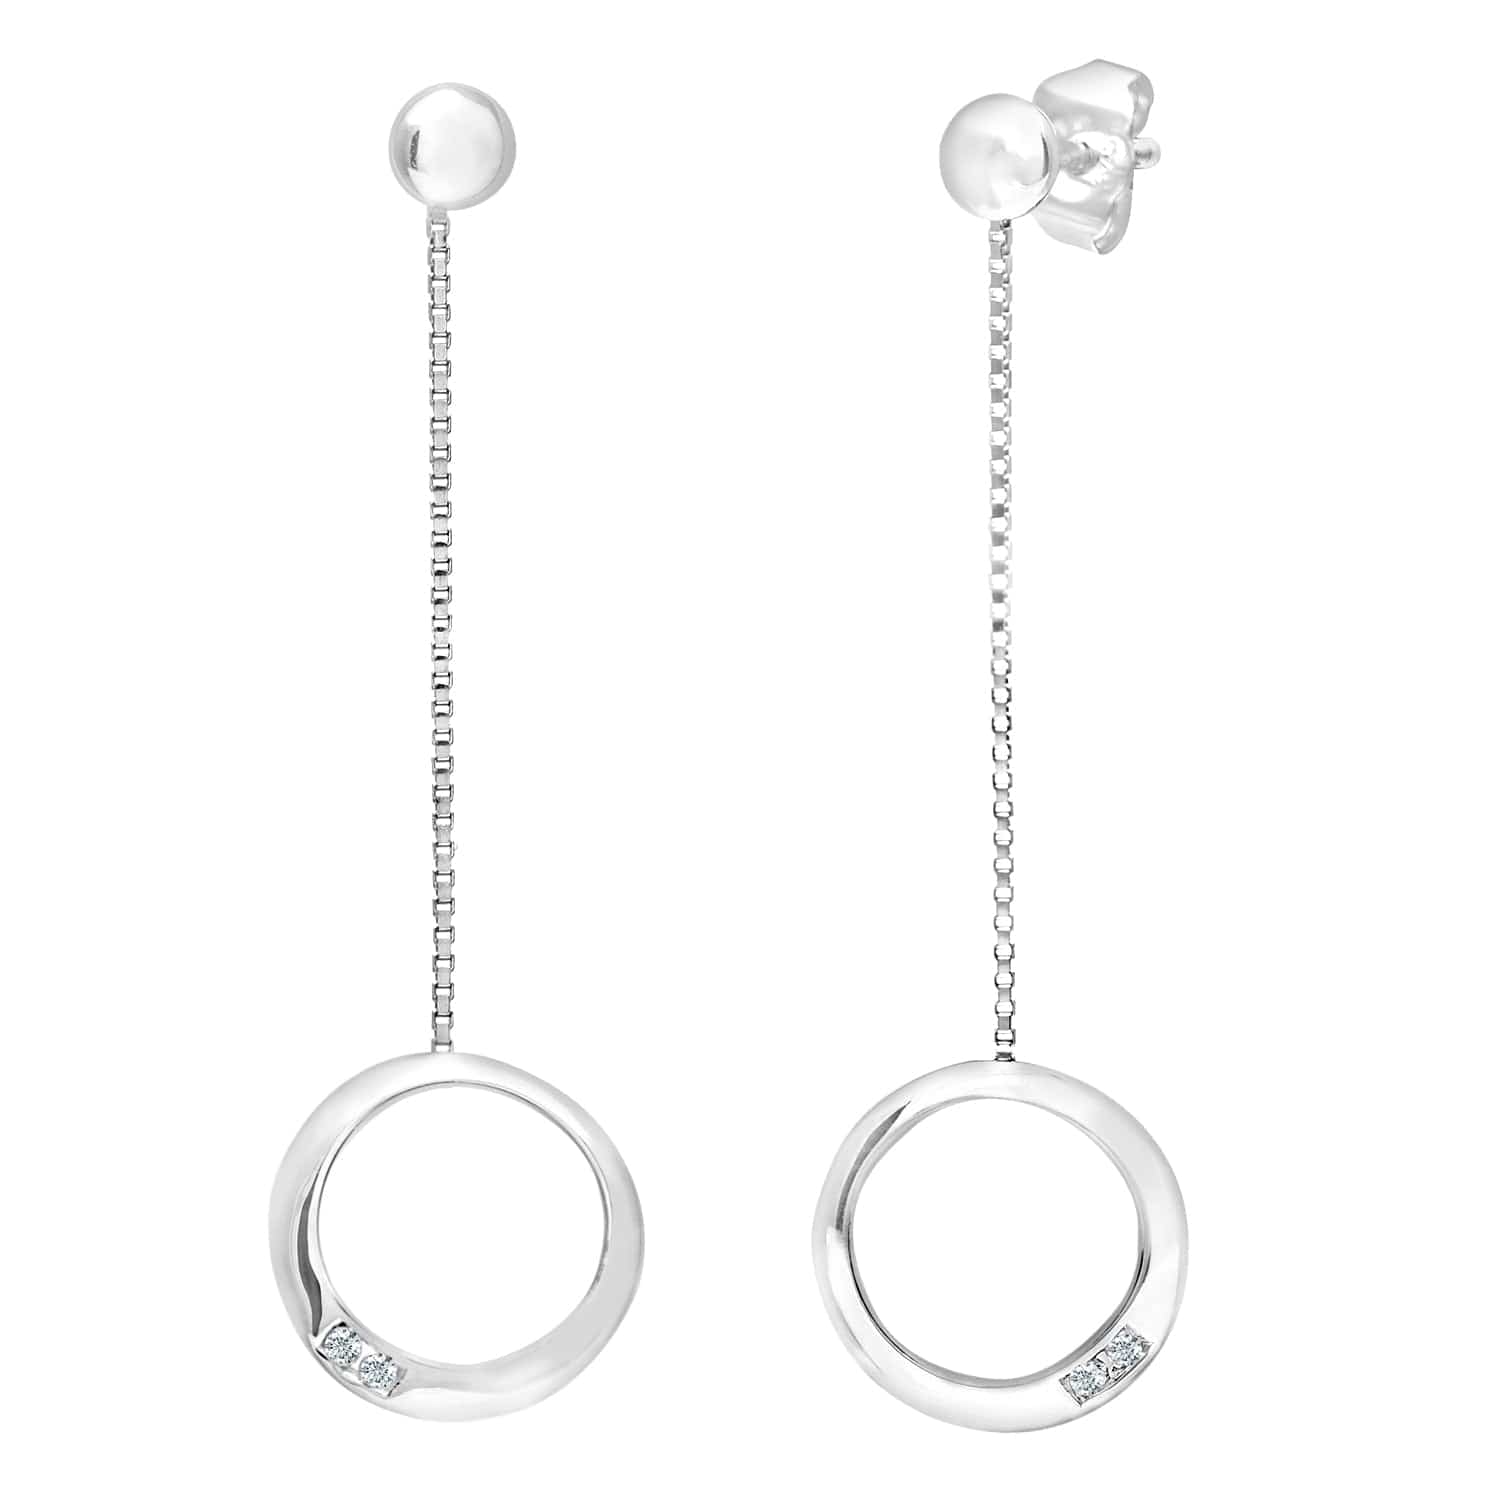 Lynora Luxe Earring White Gold 9ct / Diamond 9ct White Gold Diamond Circle Drop Earrings